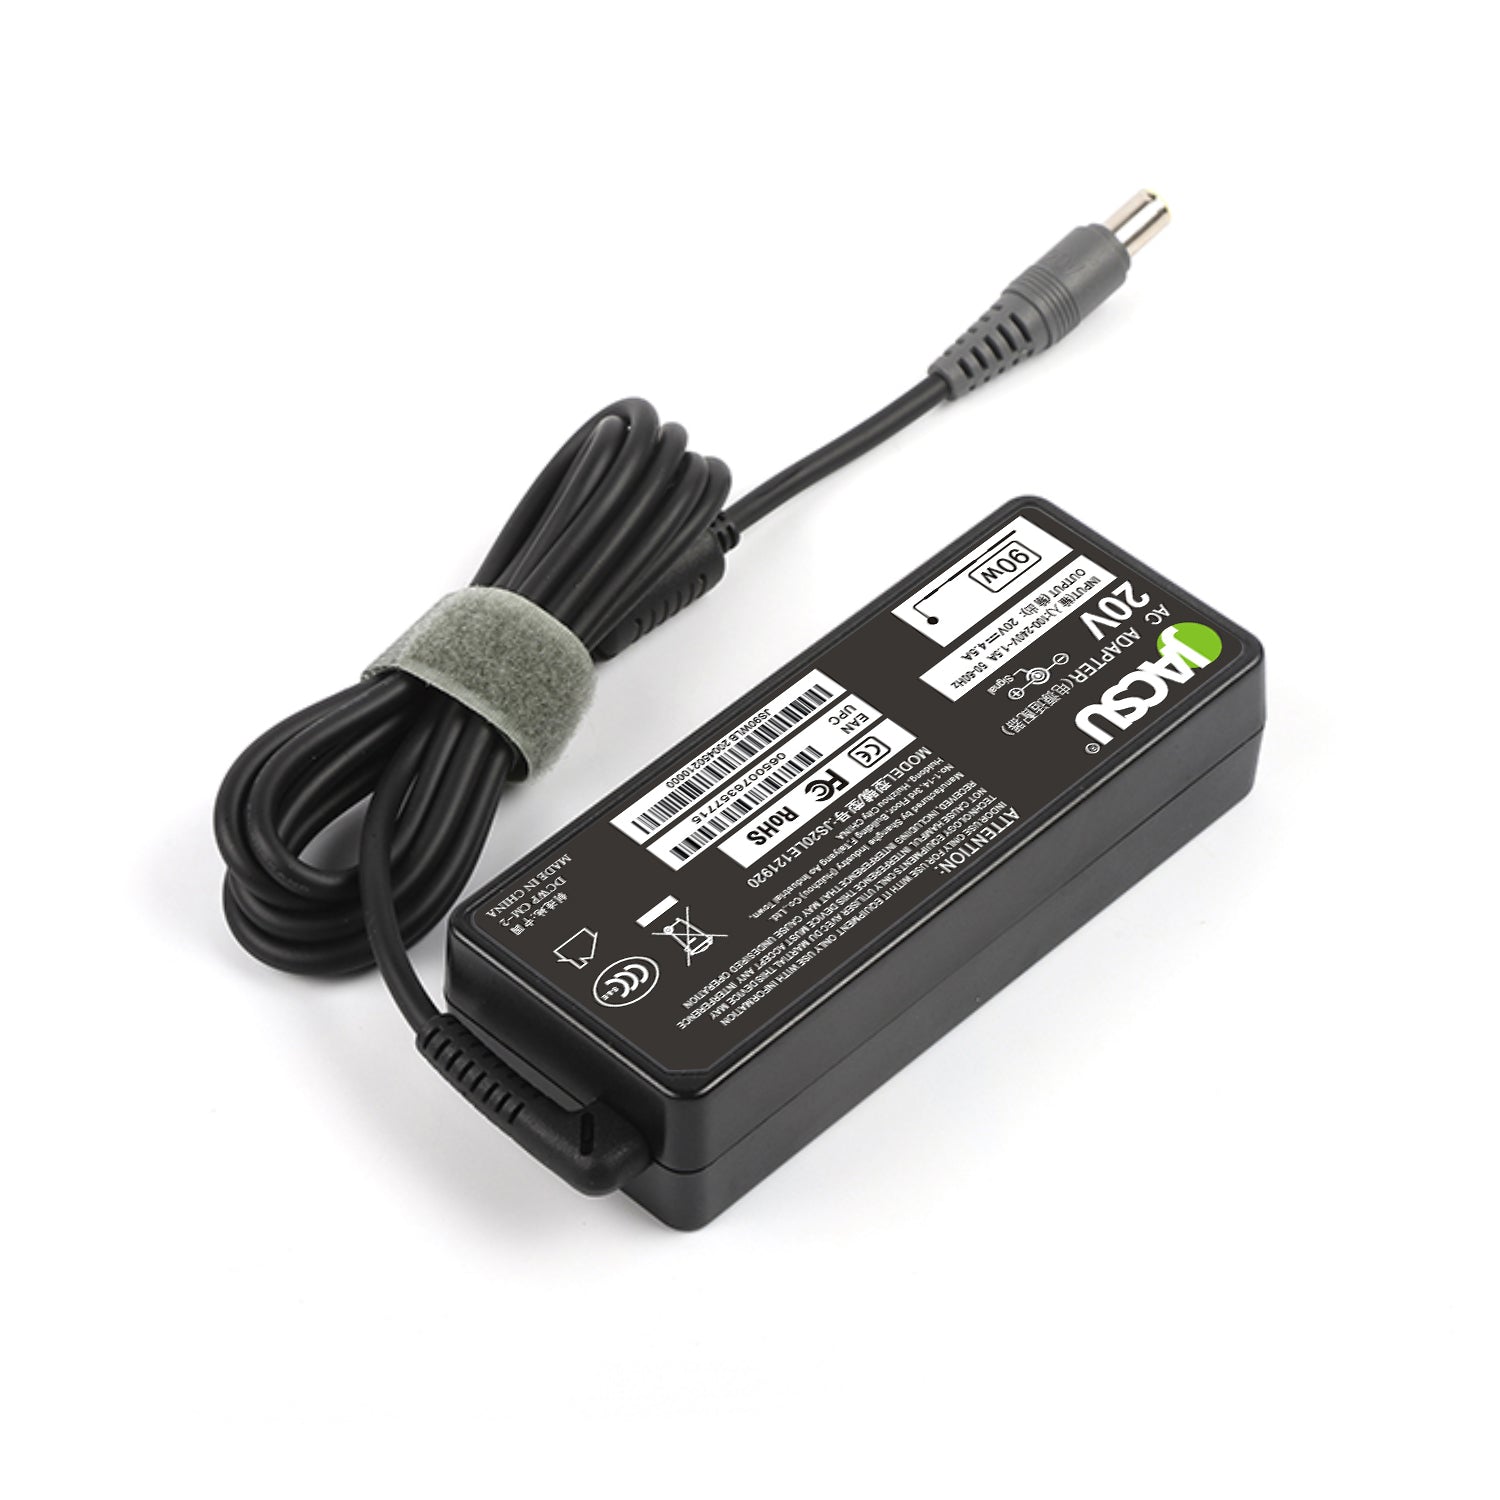 Jacsu 90W 20V 4.5A 7.9*5.5mm Laptop AC Adapter Charger for Lenovo Thinkpad T400 T410 T410i T400s Edge 11 13 14